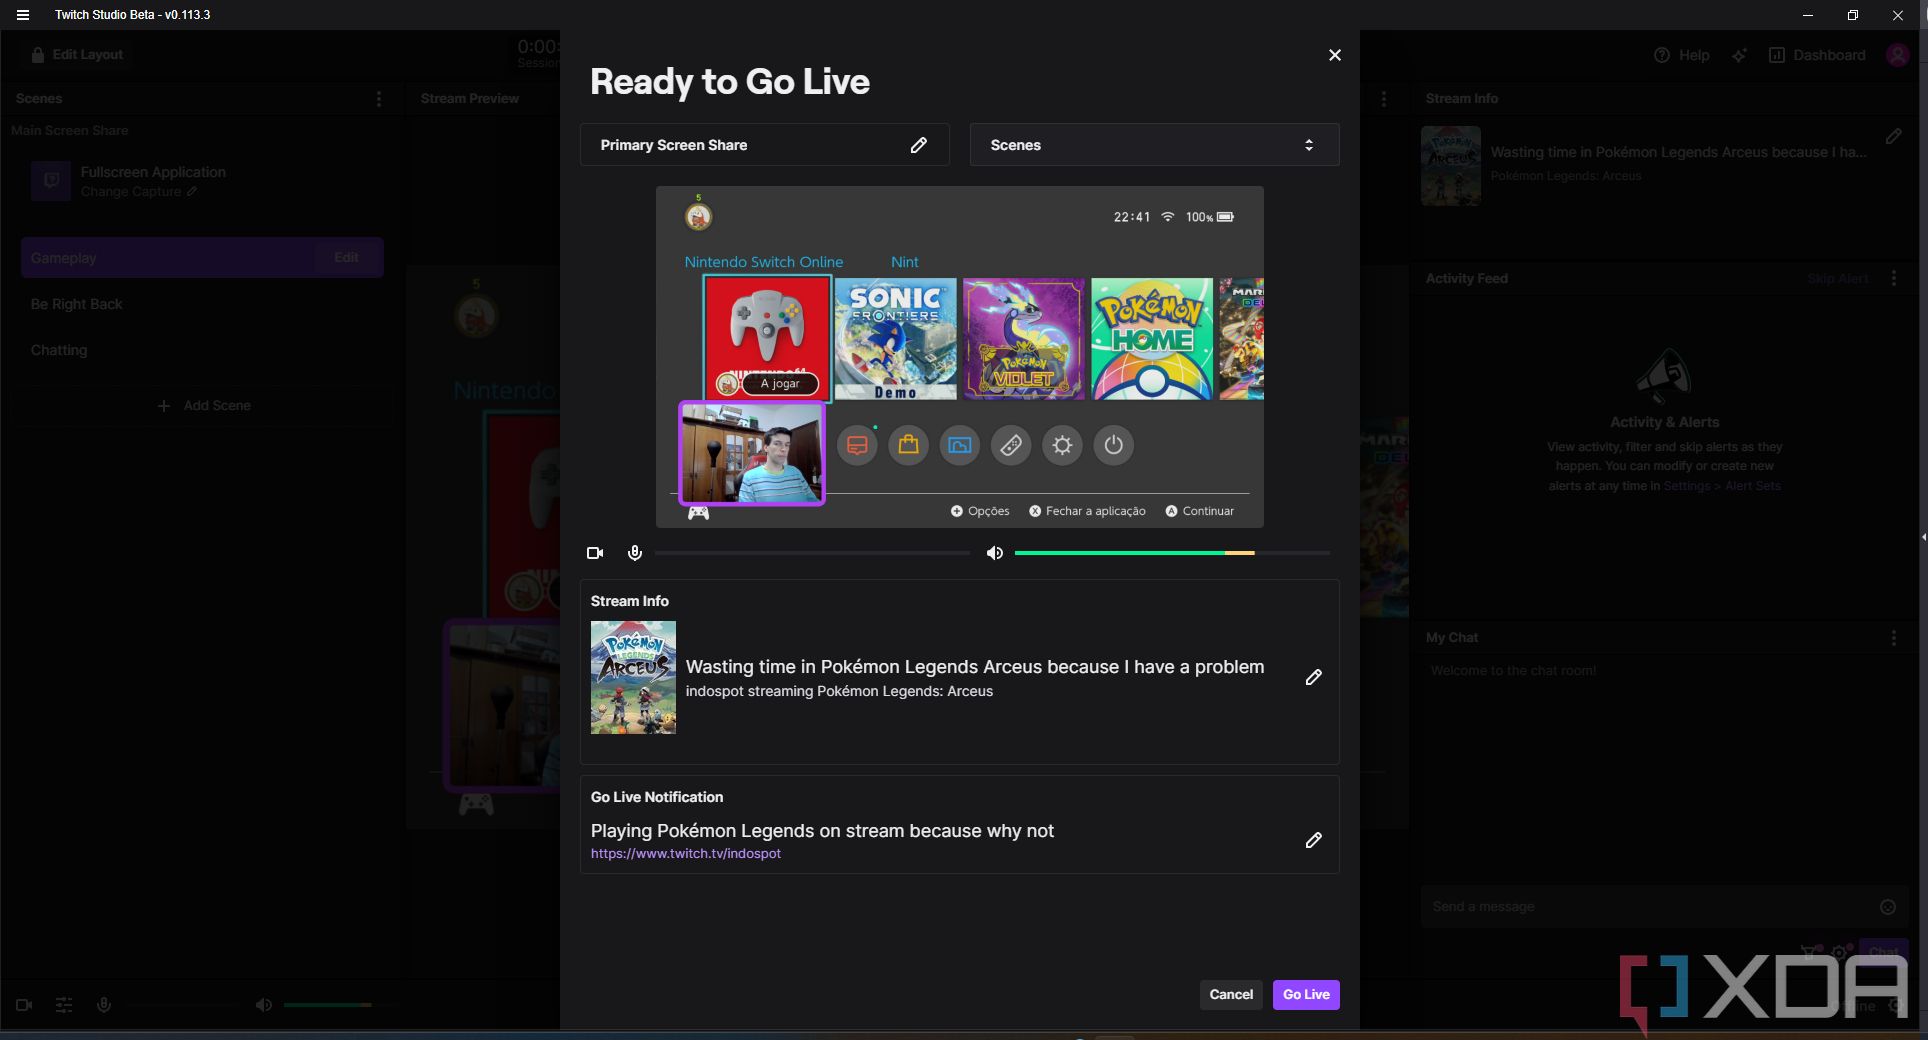 Screenshot of the Go Live screen in Twitch Studio with a view of the current scene and other stream information